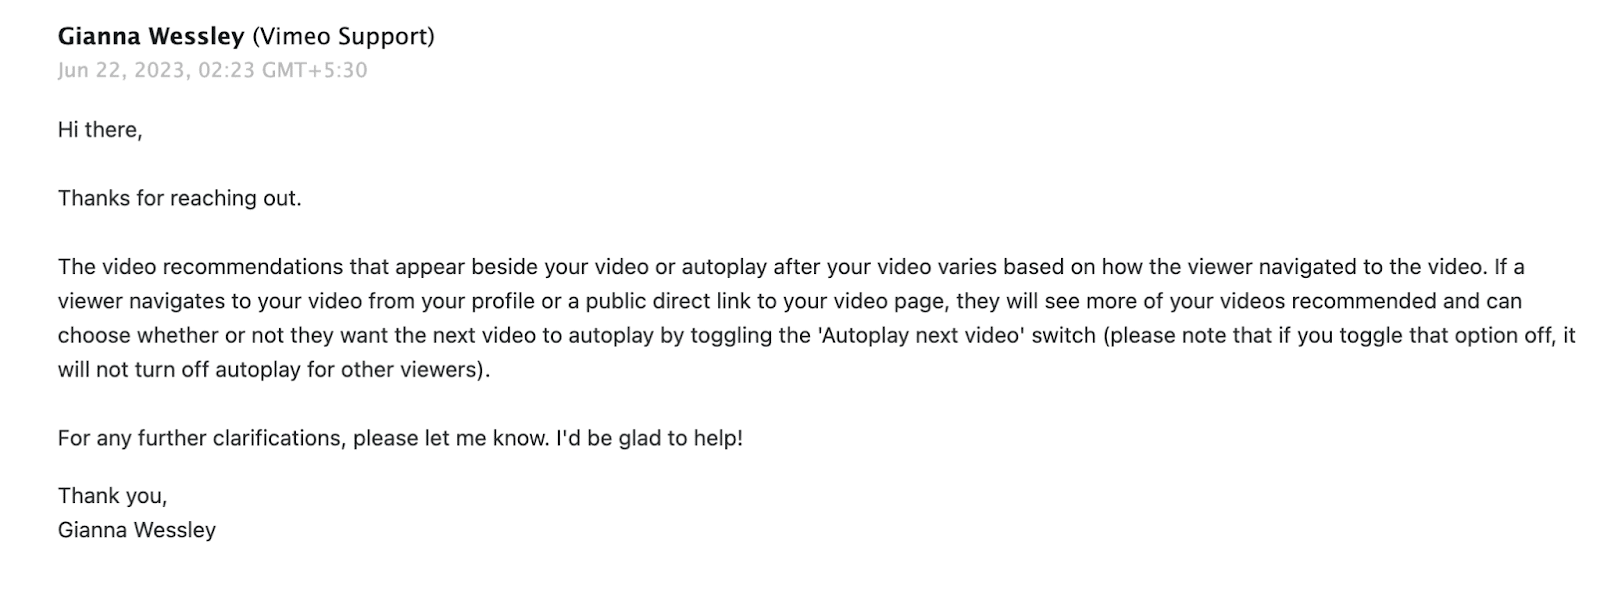 Vimeo support email